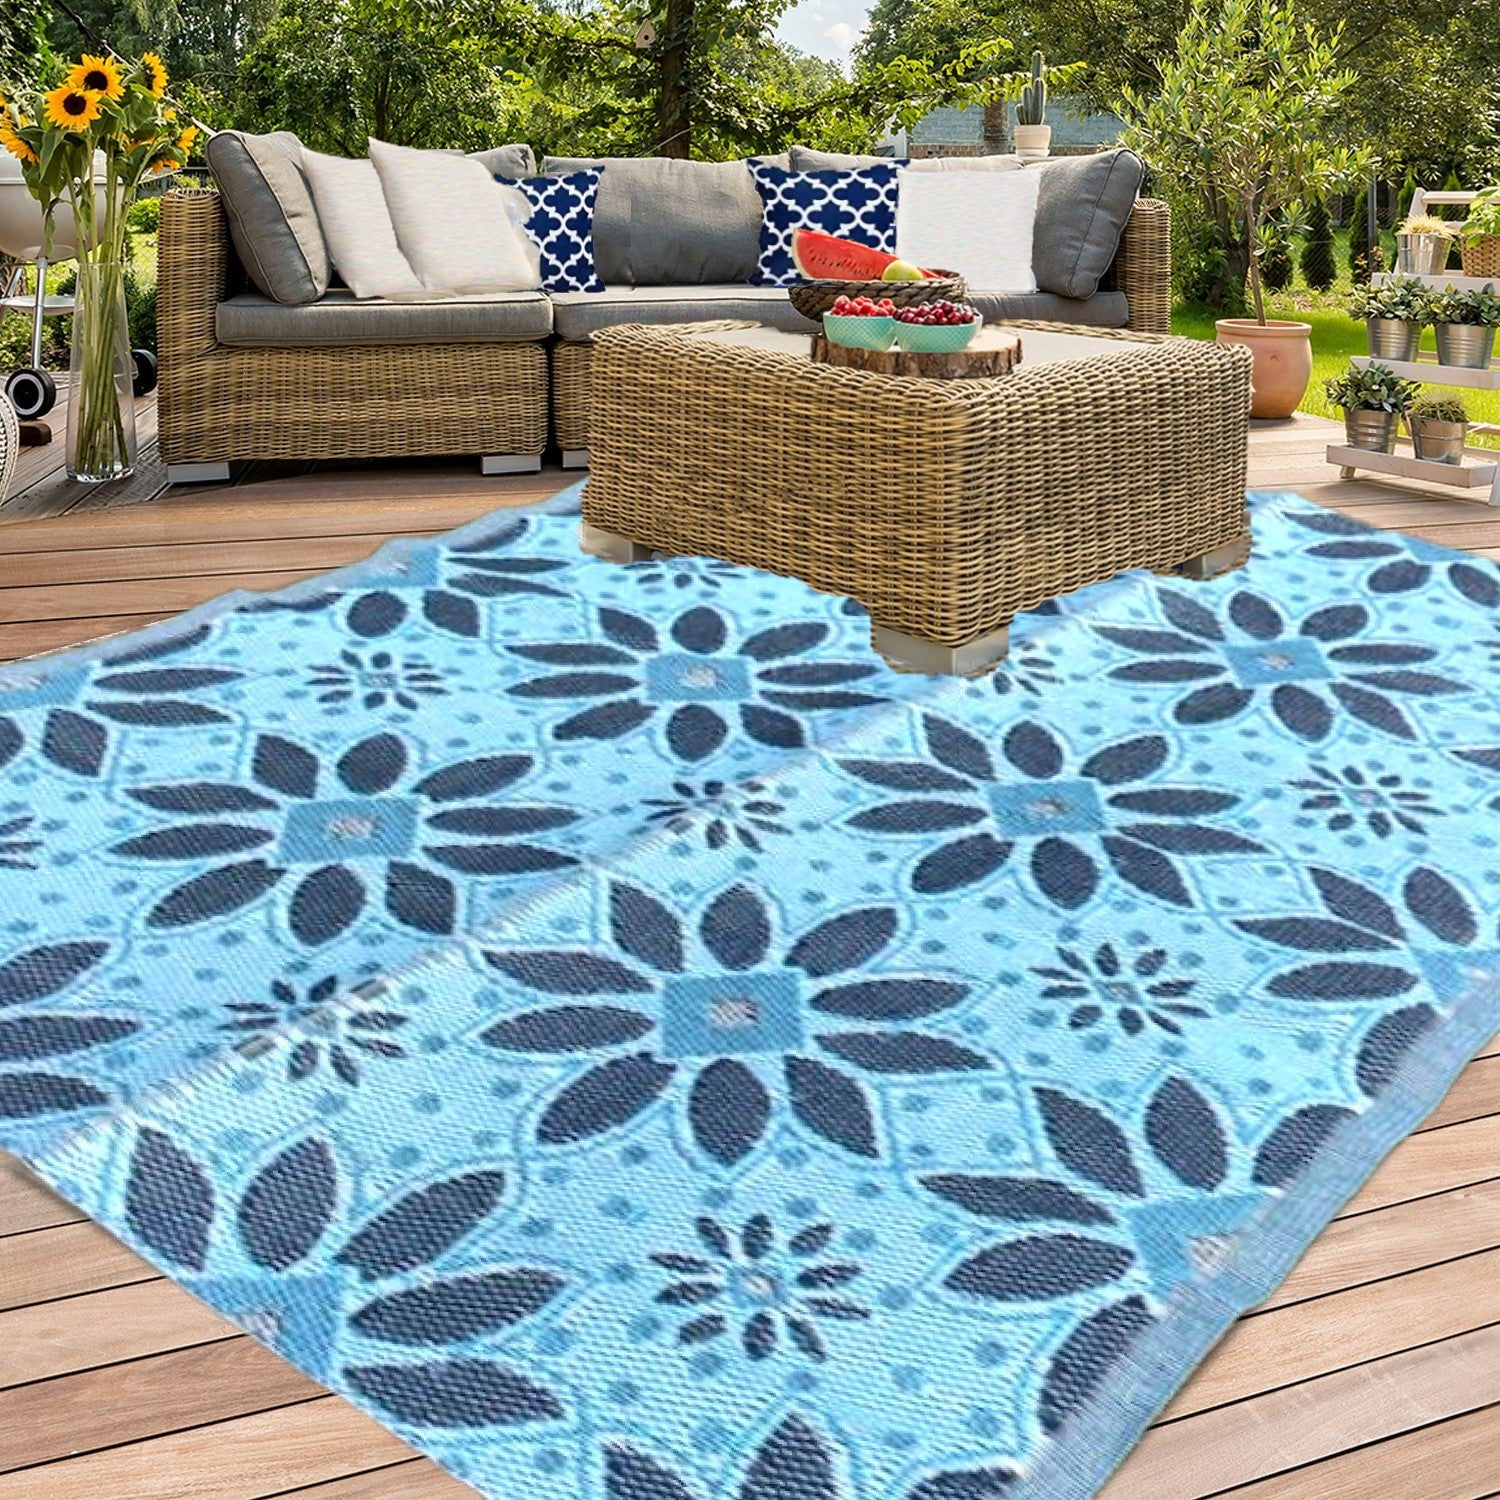 HICOOE Plastic Straw Outdoor Rugs for Patio 5x7' Waterproof Reversible Rug Modern Indoor Area Mats for Deck Rv Porch Beach Trailer Floor Balcony Backyard Camping Black & White 